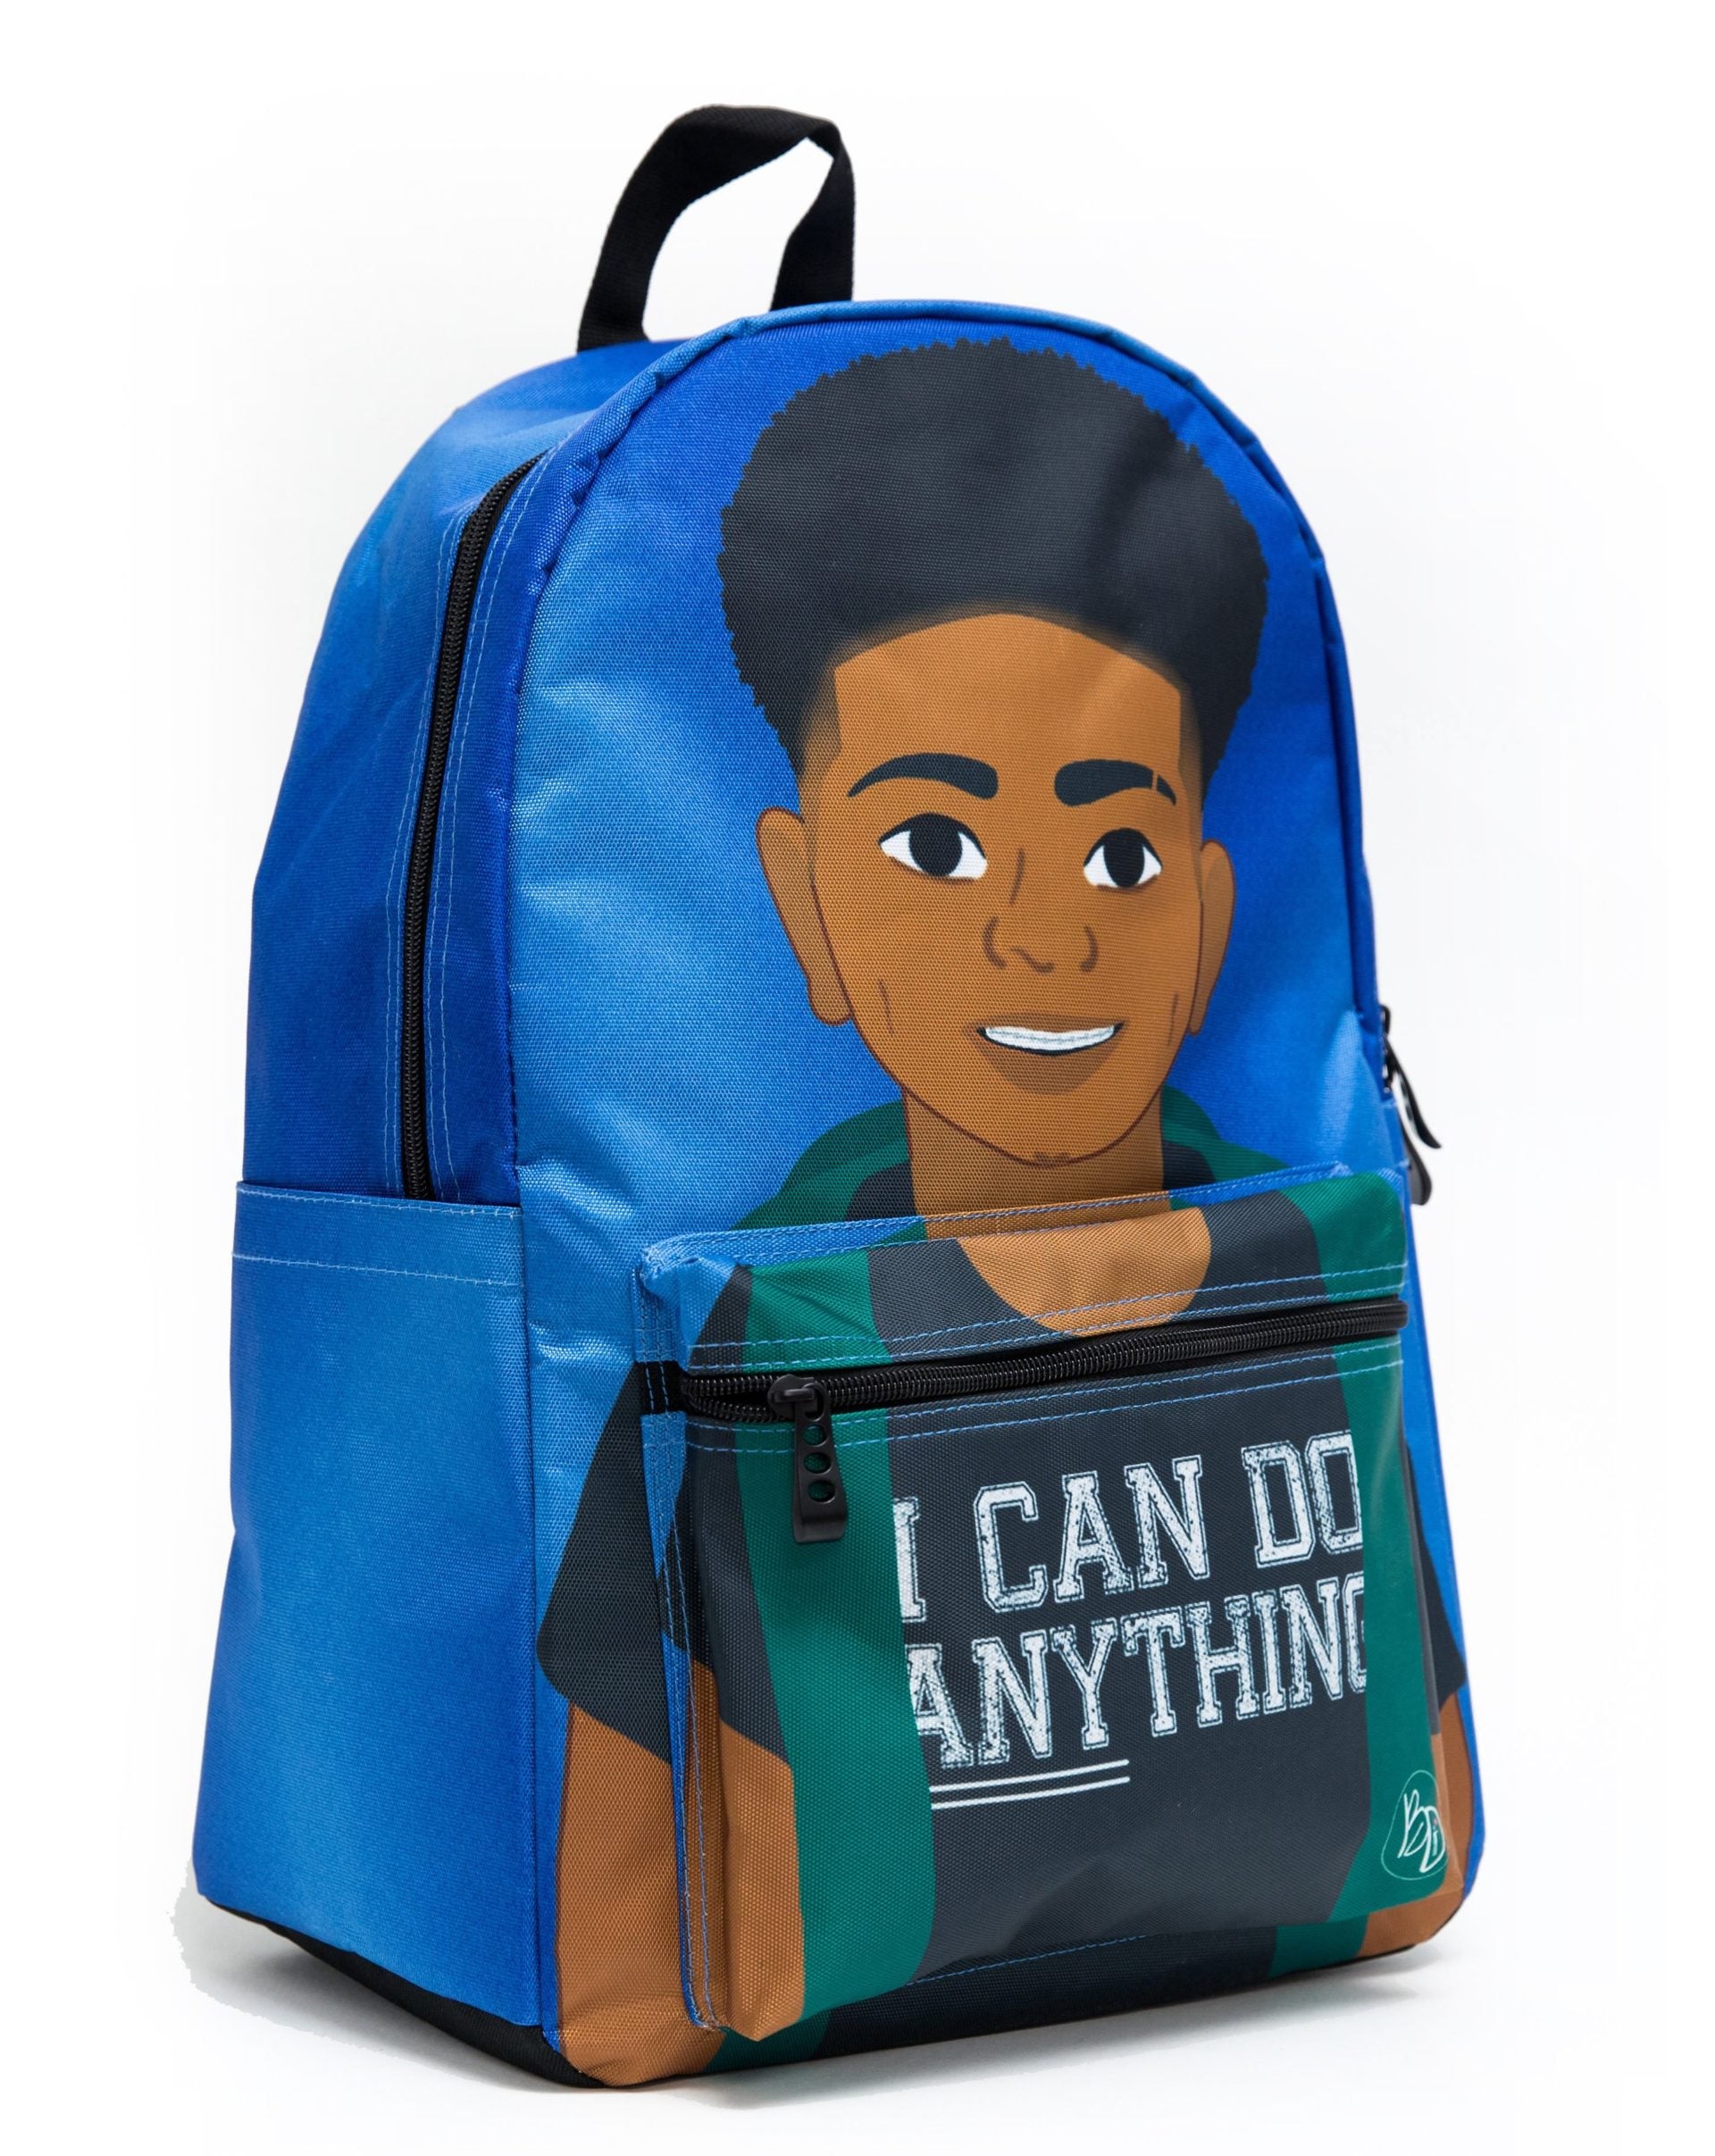 #BuyBlack Gift Guide: 23 Gifts For The Kids On Your List